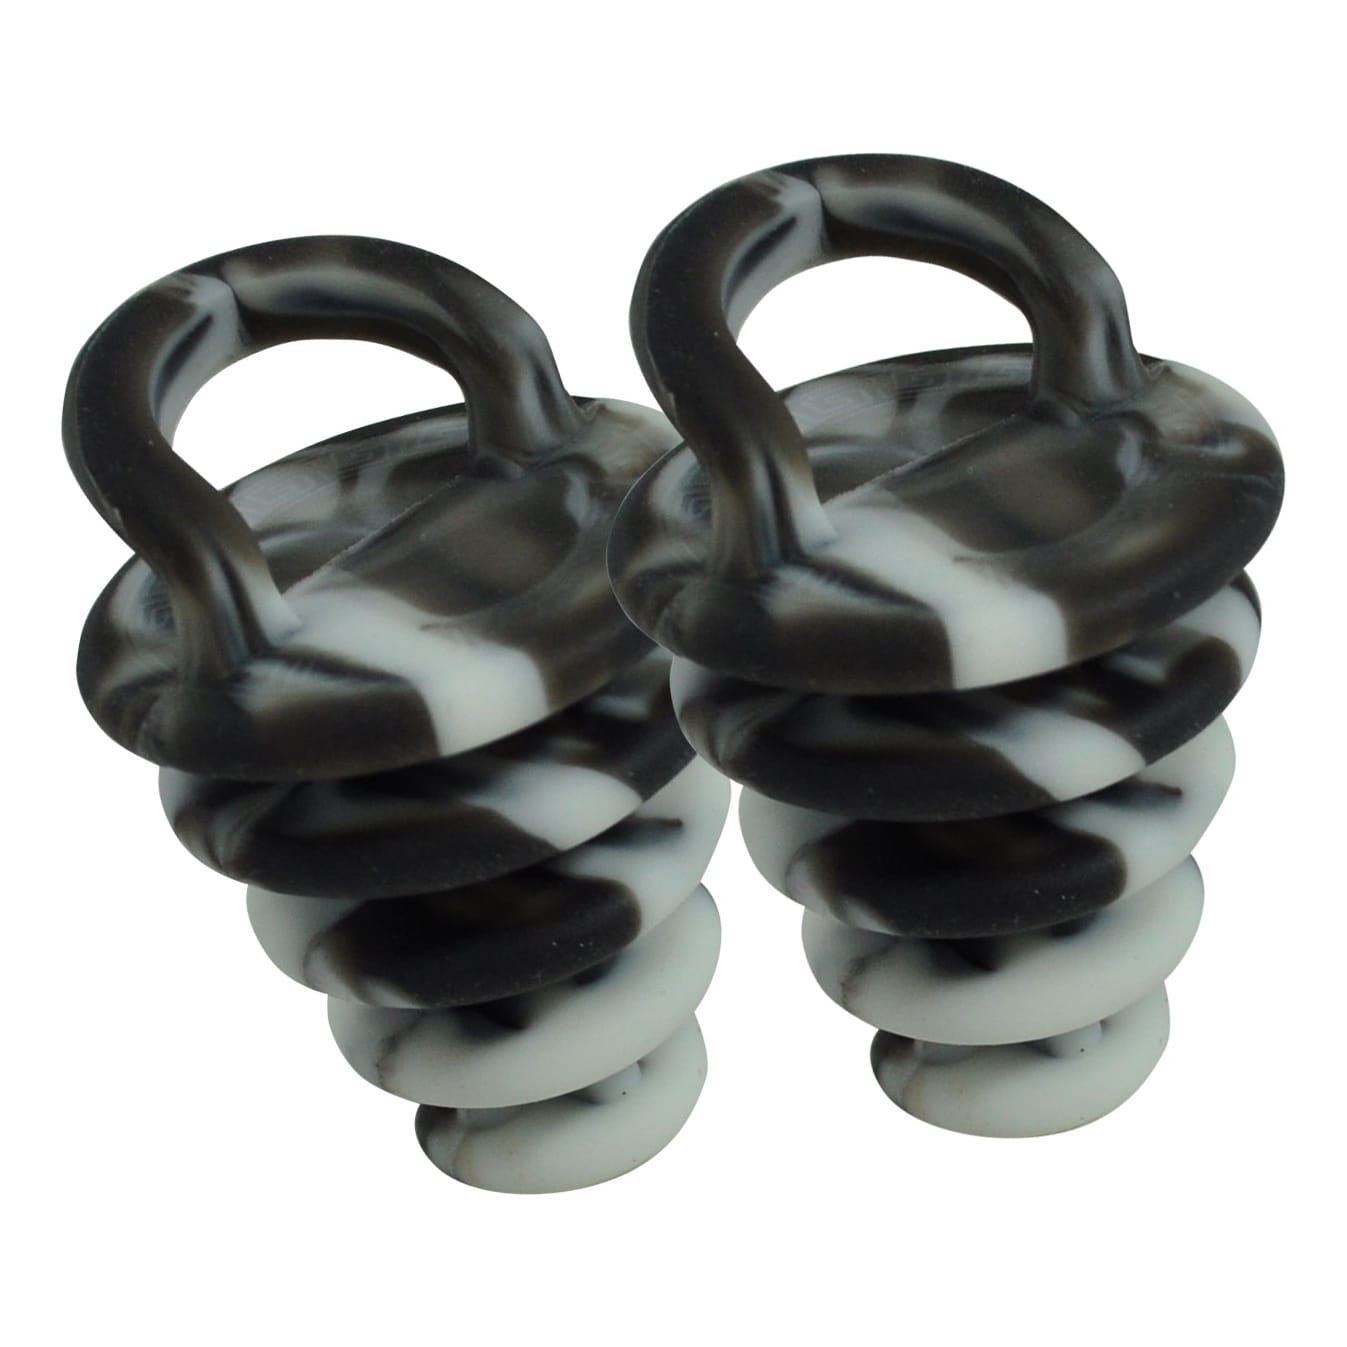 Seattle Sports Scupper Plugs - Pair